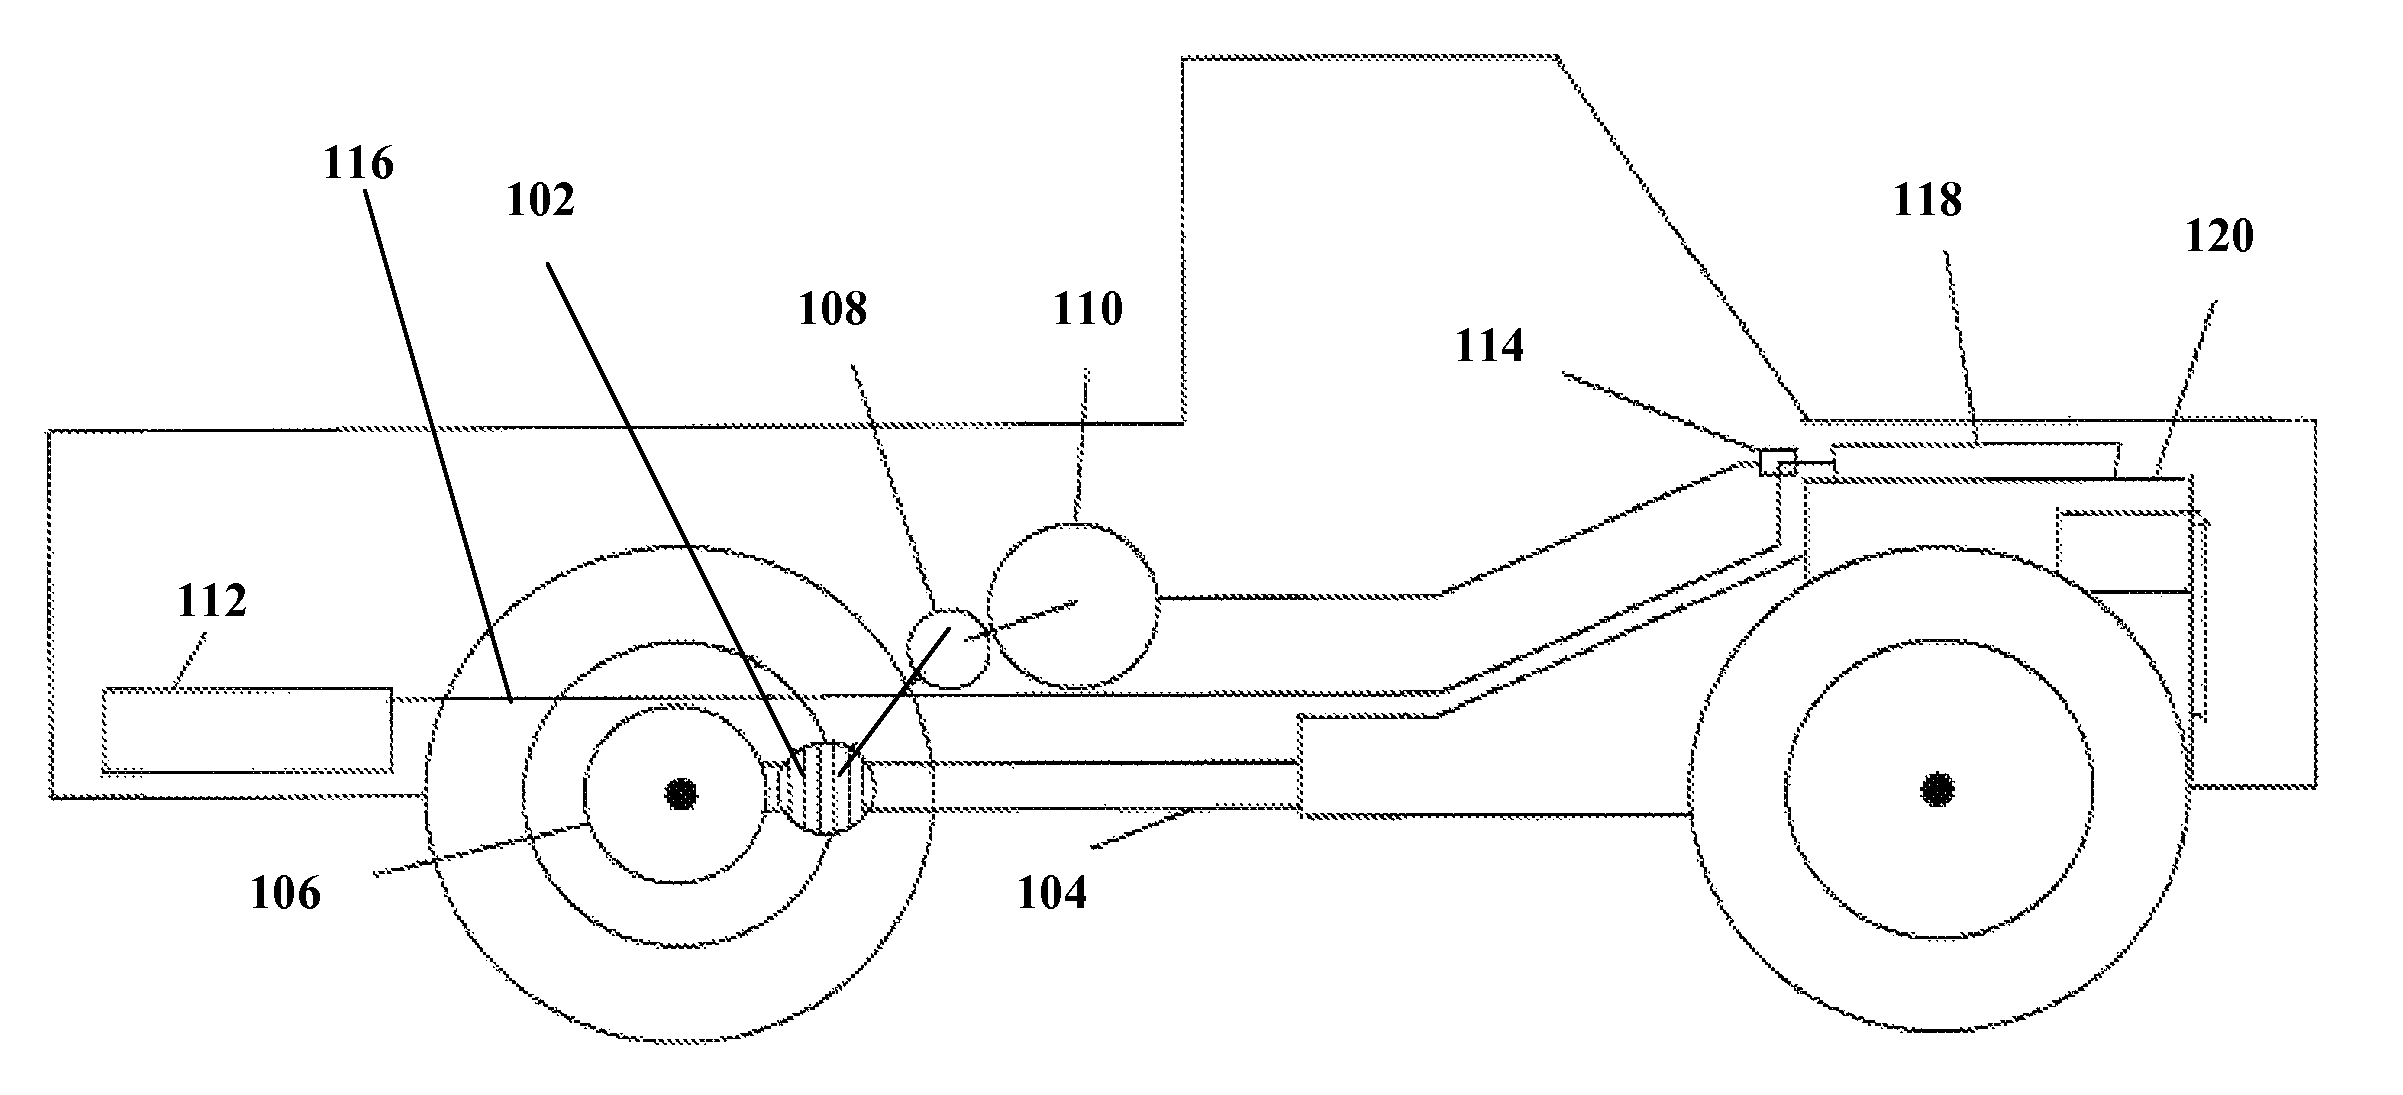 Energy conversion system for hydrogen generation and uses thereof